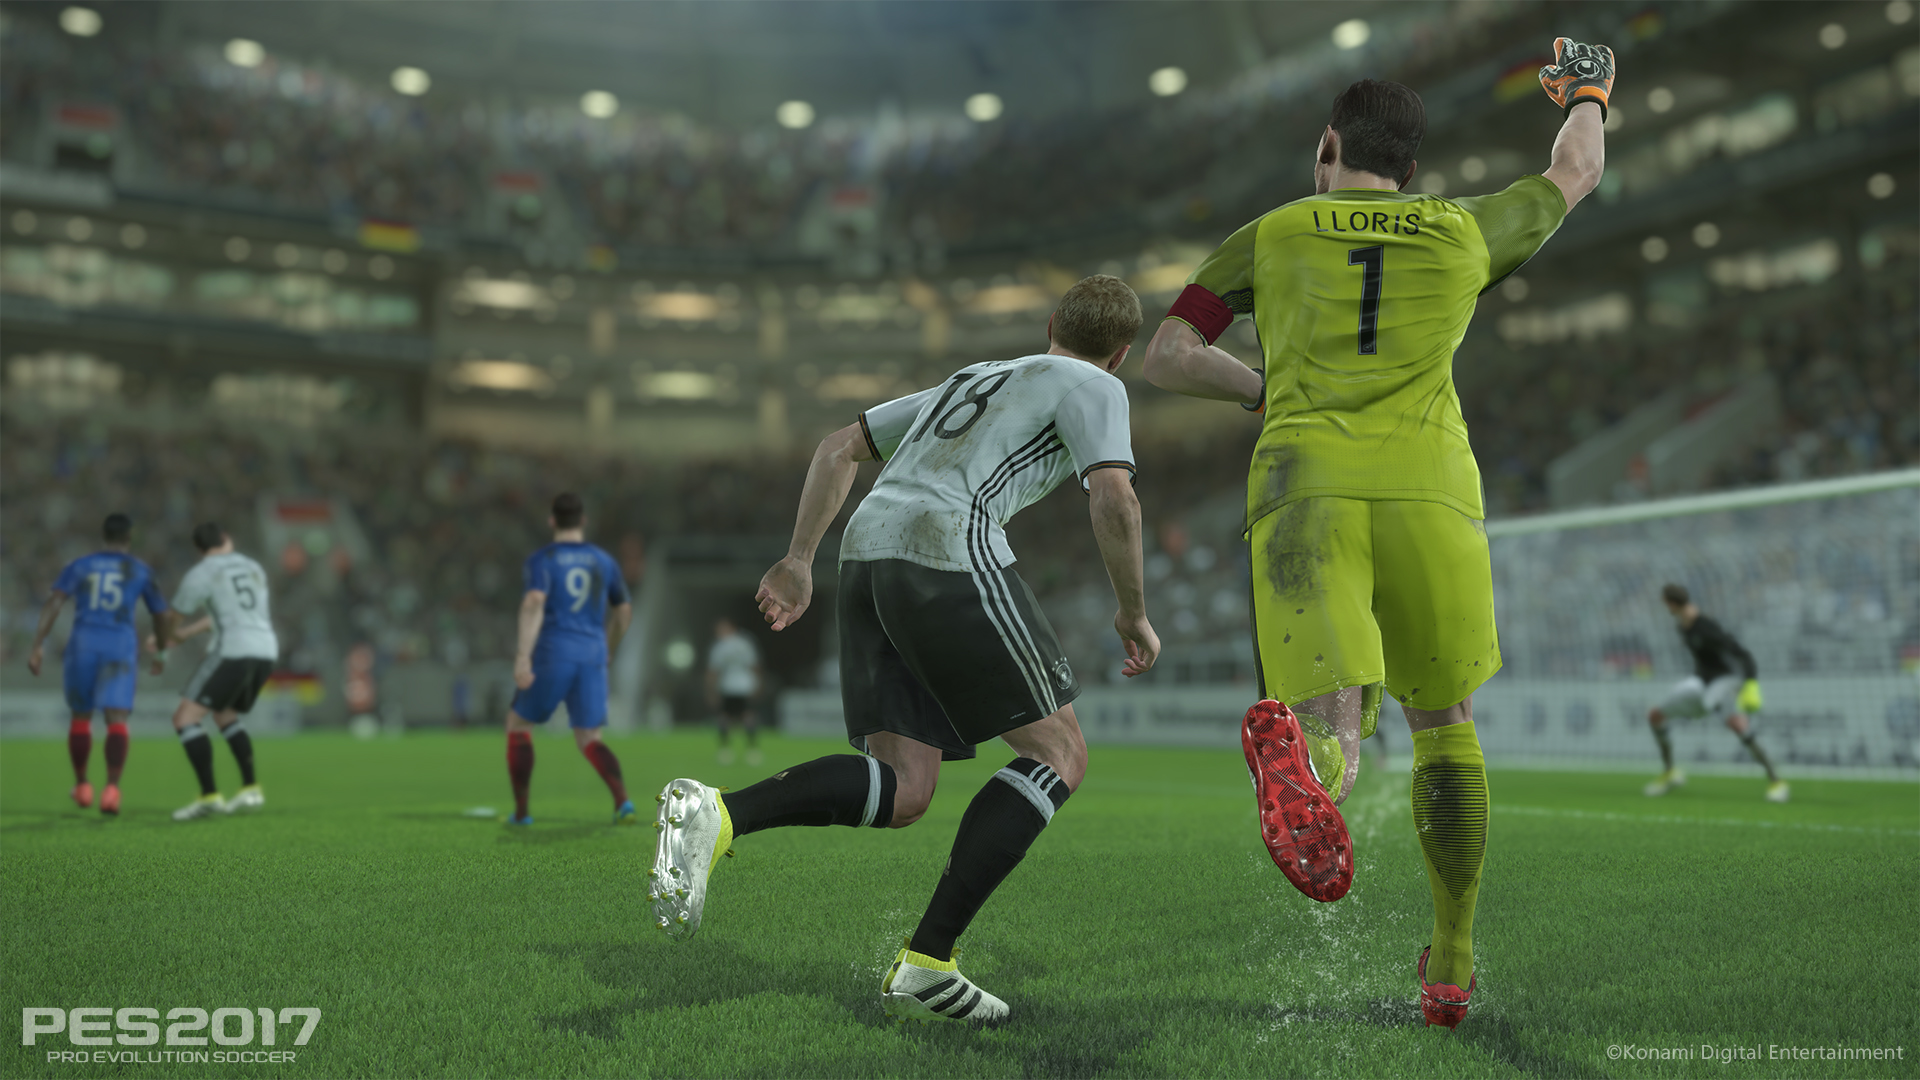 PES 2017 Hands On